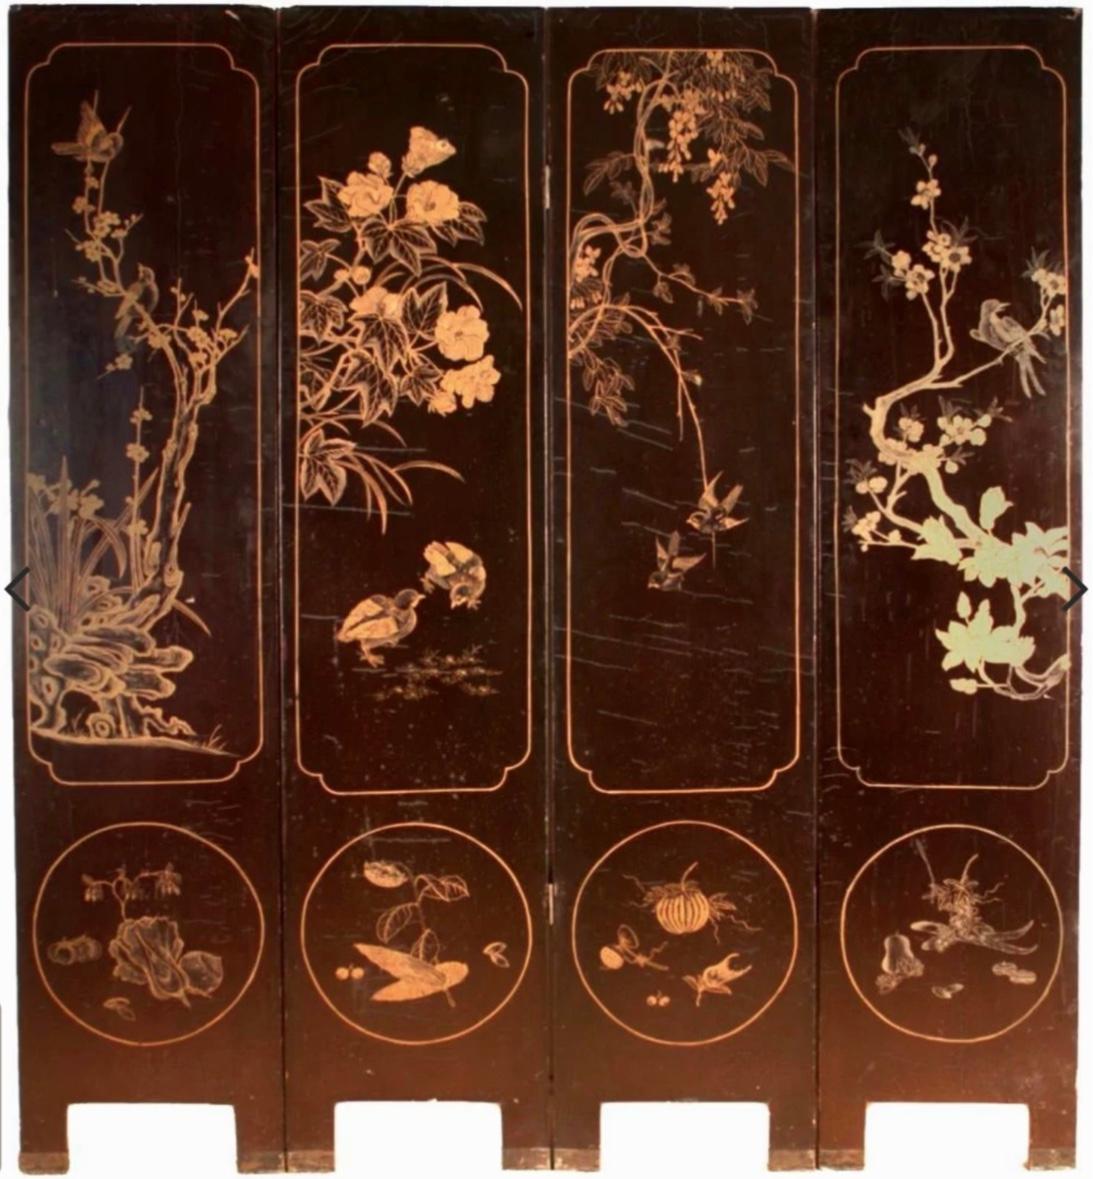 Antique Chinese four panel Coromandel black Lacquer screen with stone inlay
Beautifully hand painted antique 4 panel screen. Black lacquer with inlaid stones. Over 100 years old from mainland China and dating back to 19th Century. Excellent